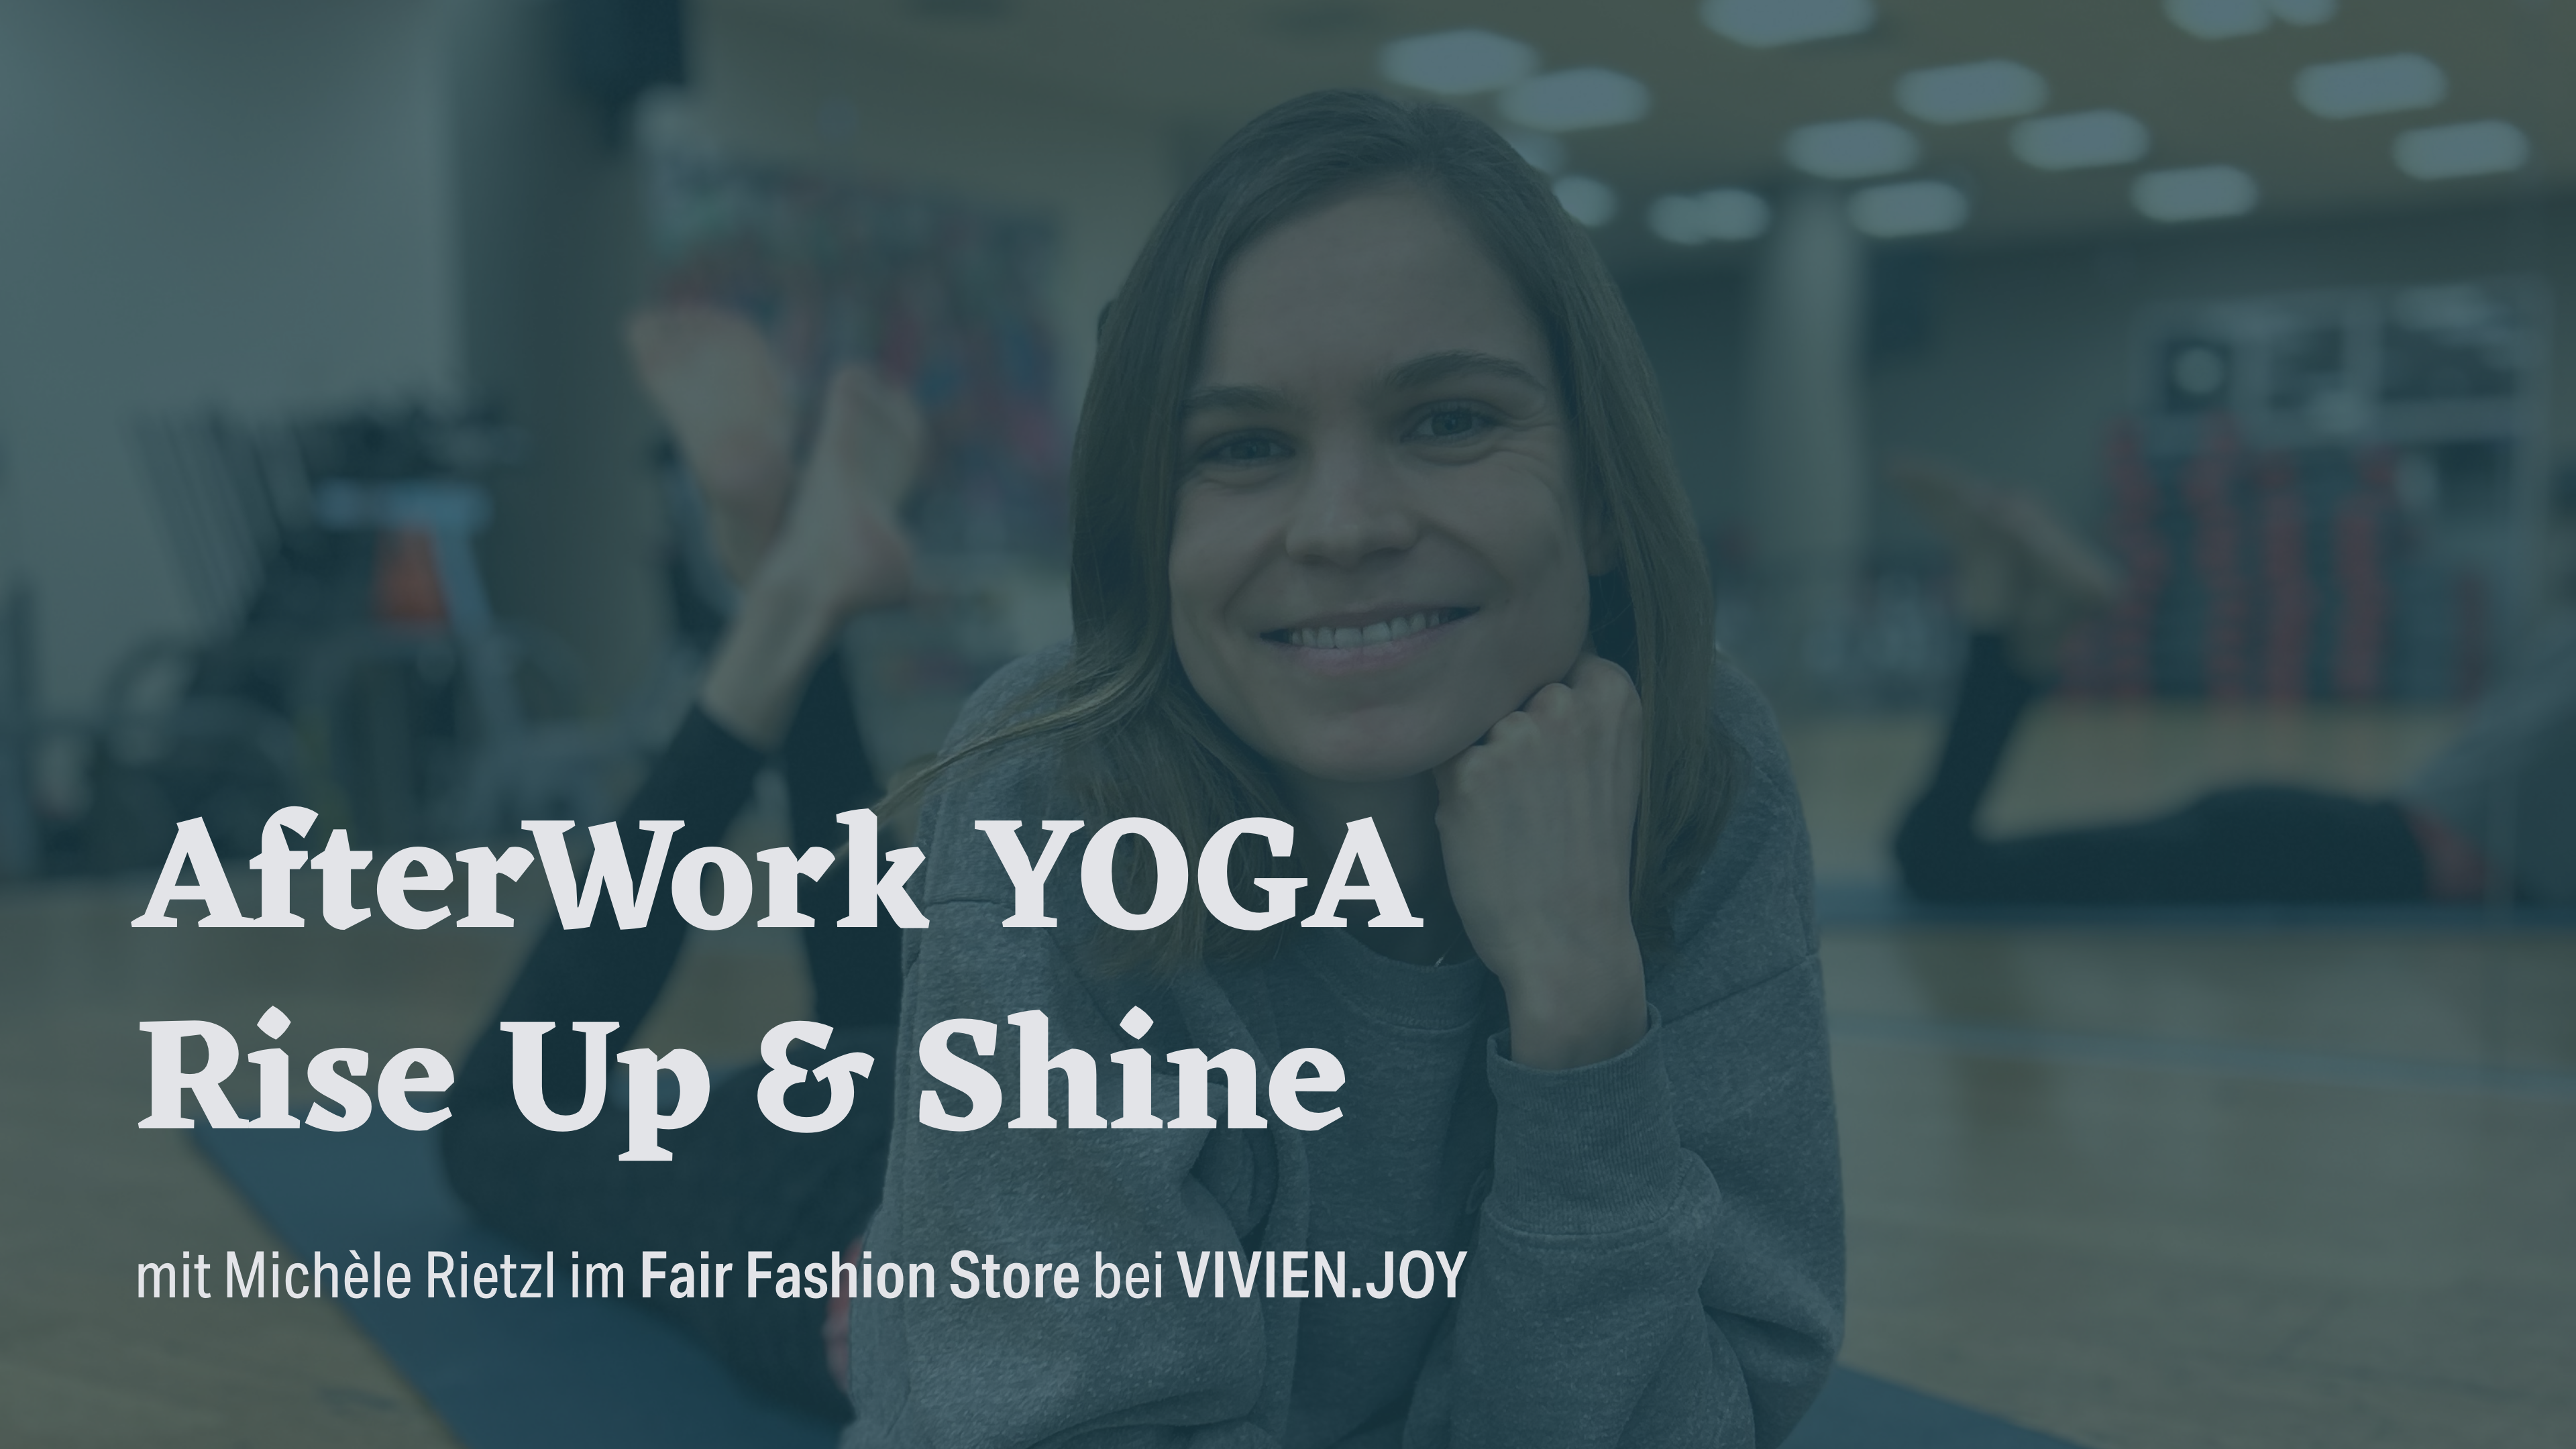 AfterWork YOGA Rise Up and Shine mit mk rietzl